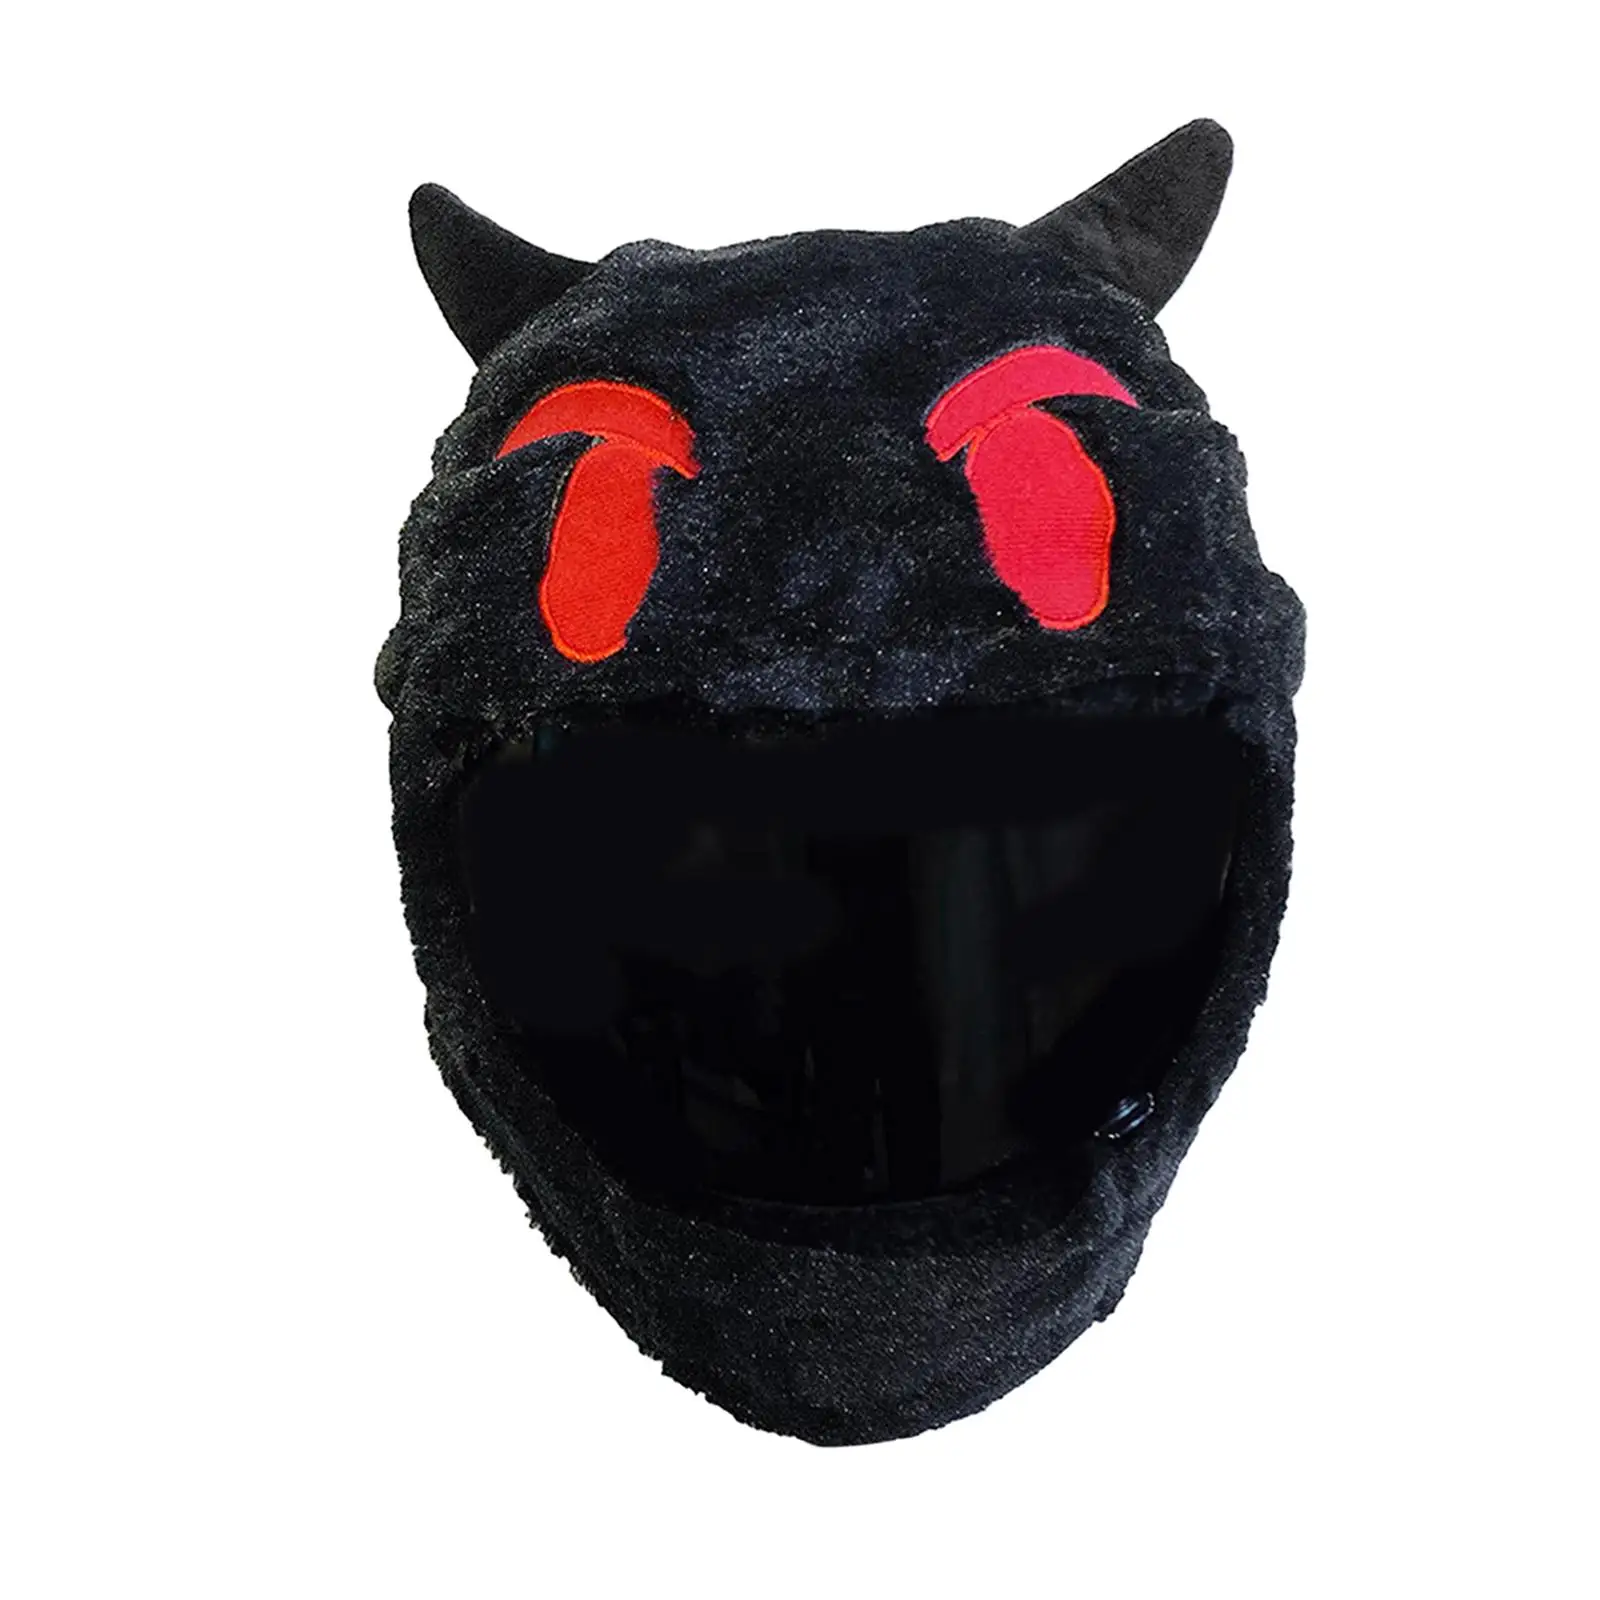 Devil Motorcycle Helmet Cover Cute Creative Gifts Easy to Install Motorbike Ski Accessories Full Face Helmet Protective Cover